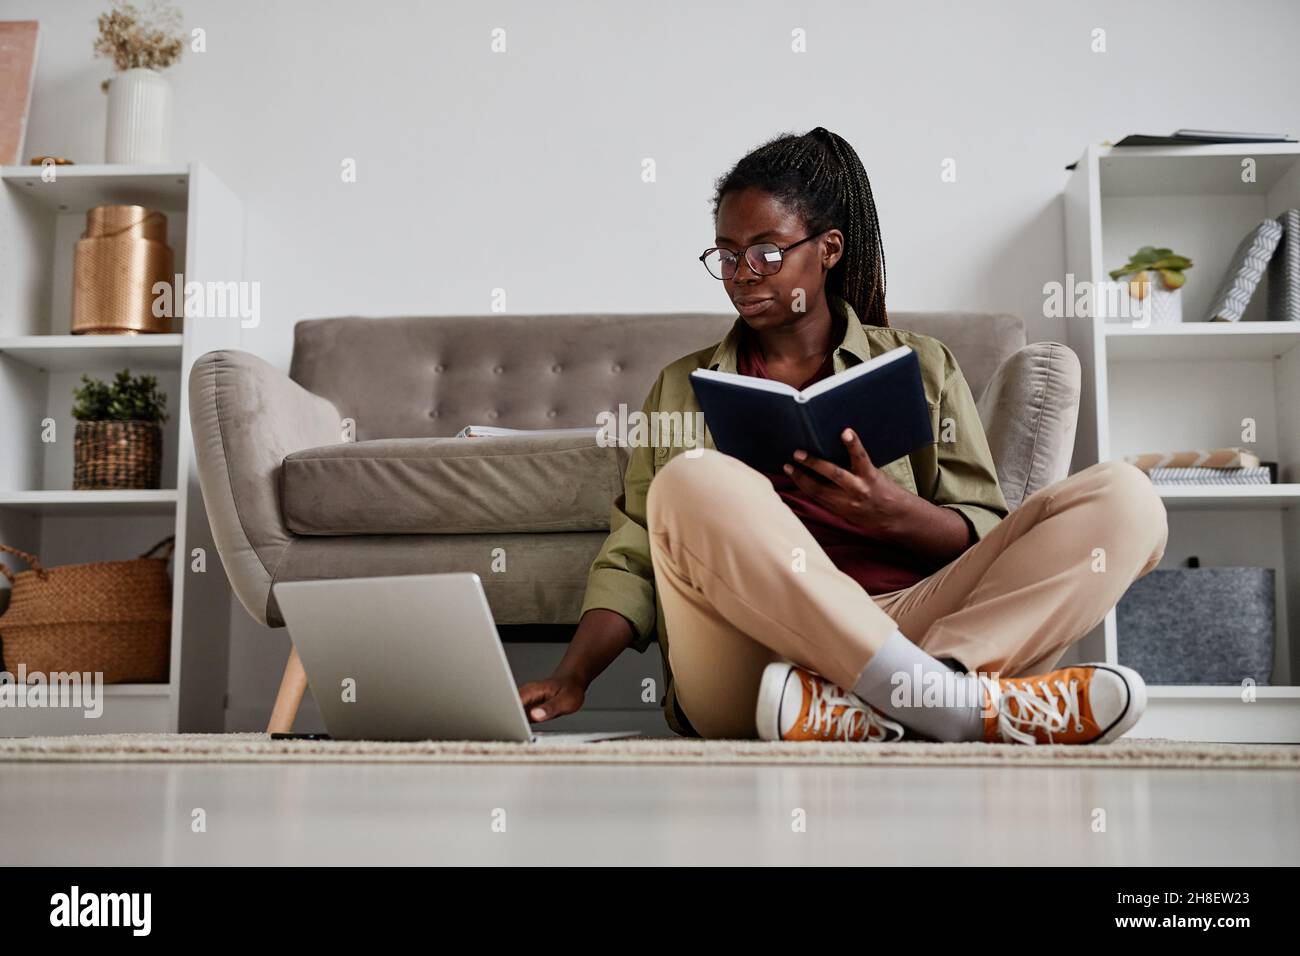 Full length portrait of young African-American woman working from home while sitting on floor in comfortable setting, copy space Stock Photo